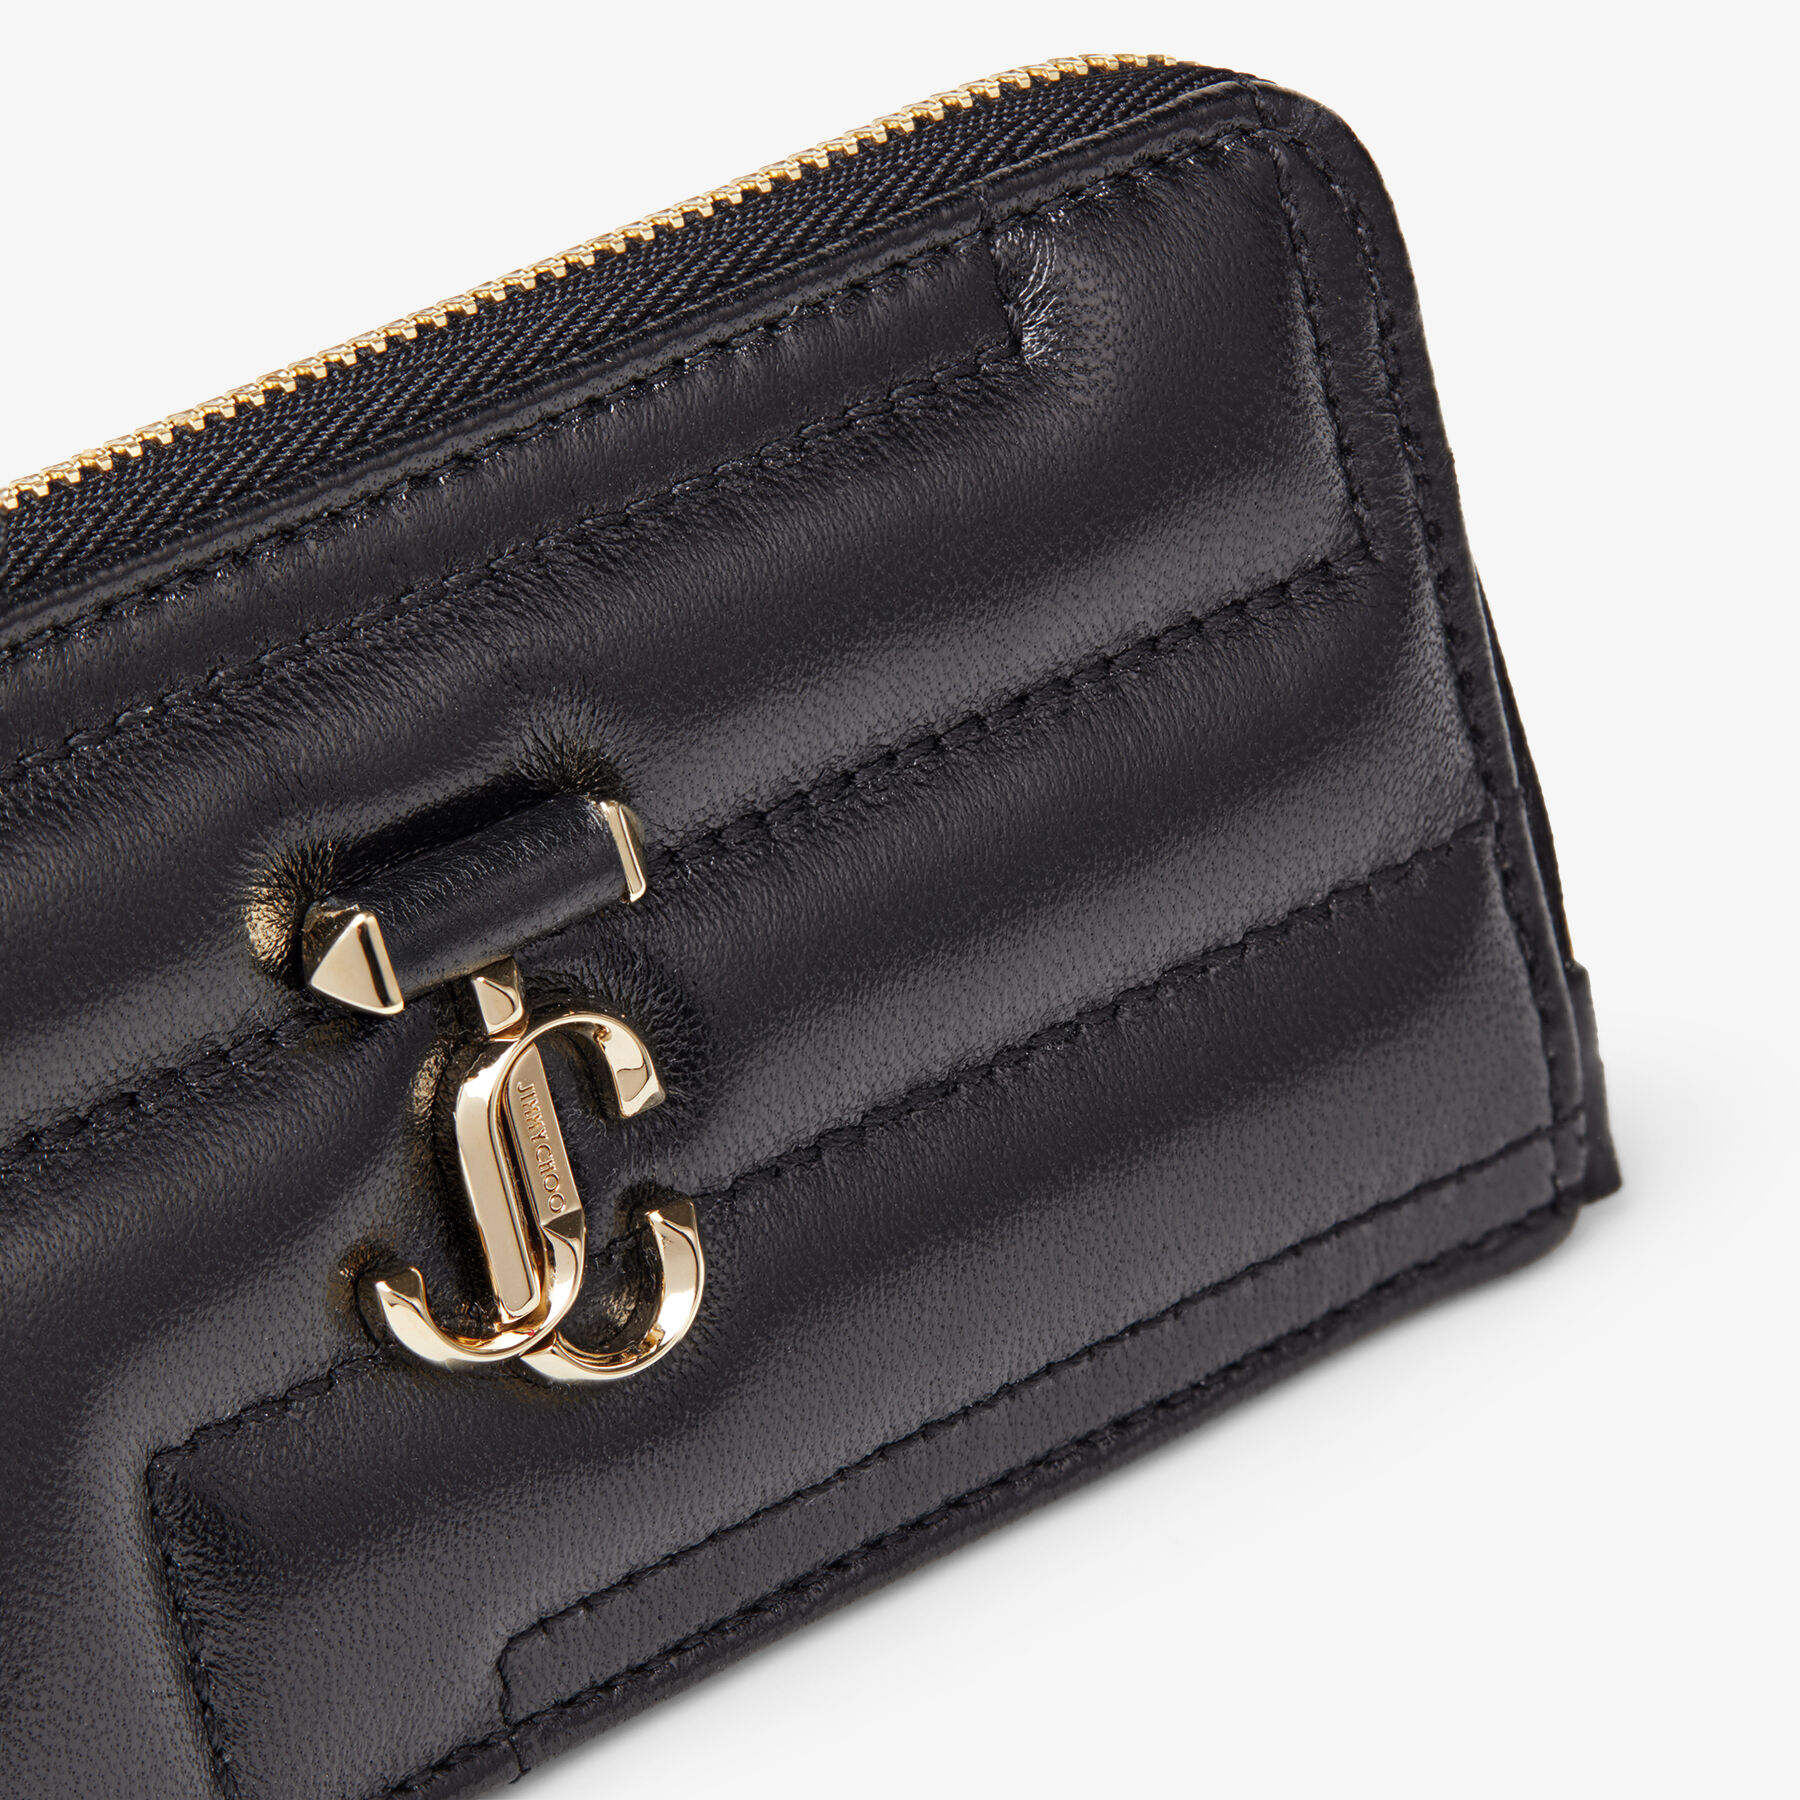 Black Quilted Nappa Leather Card Holder with JC Emblem | LISE-Z